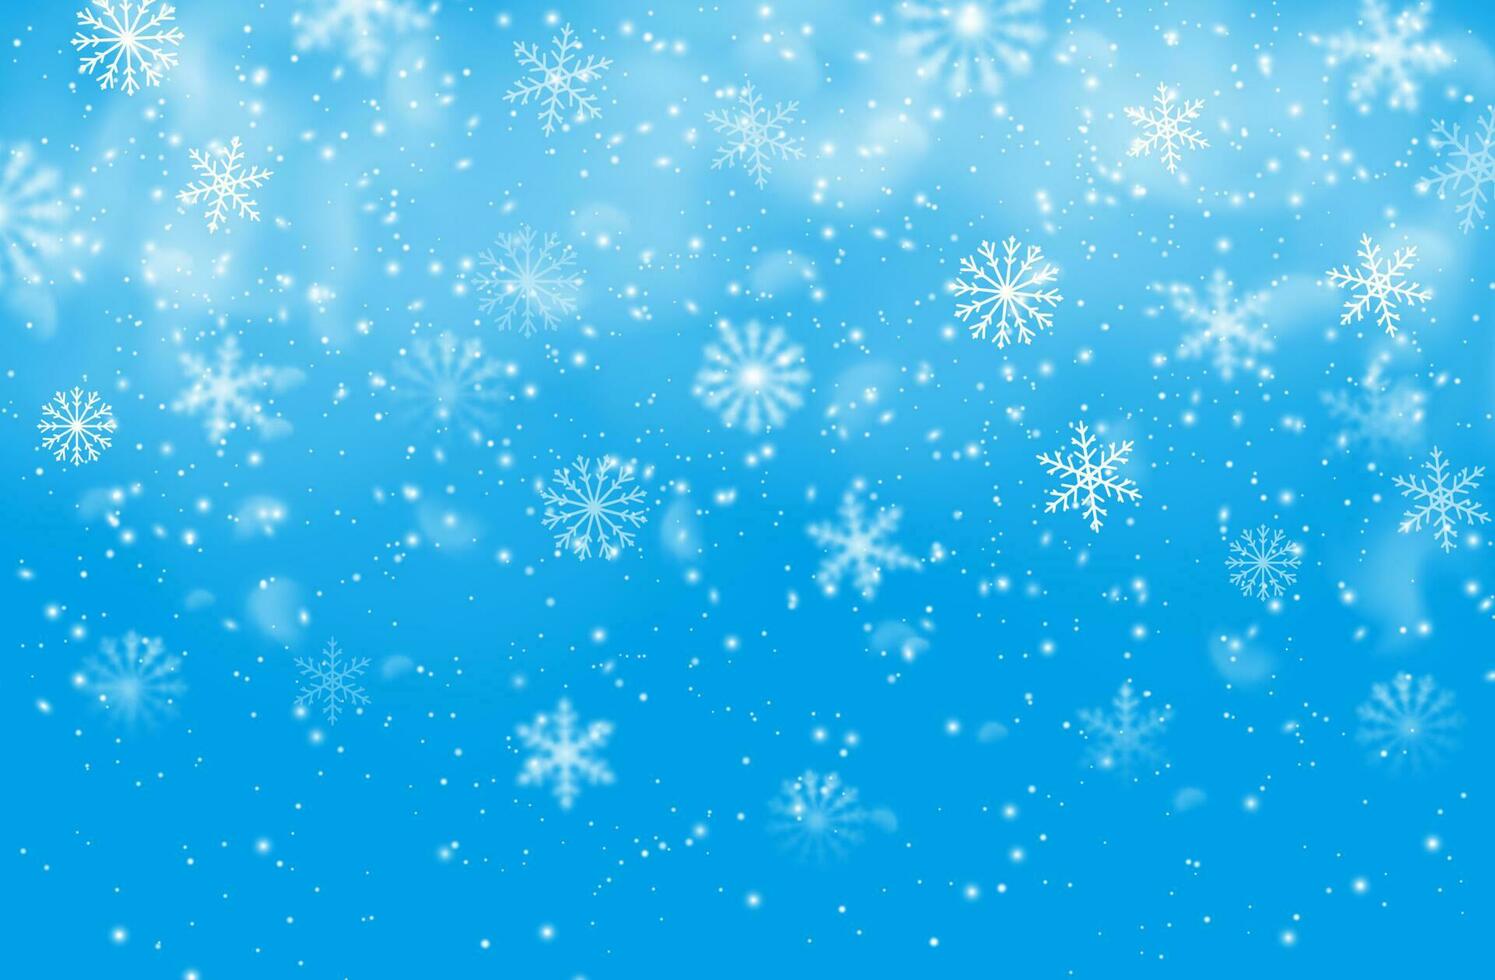 Christmas snowflakes blue vector background